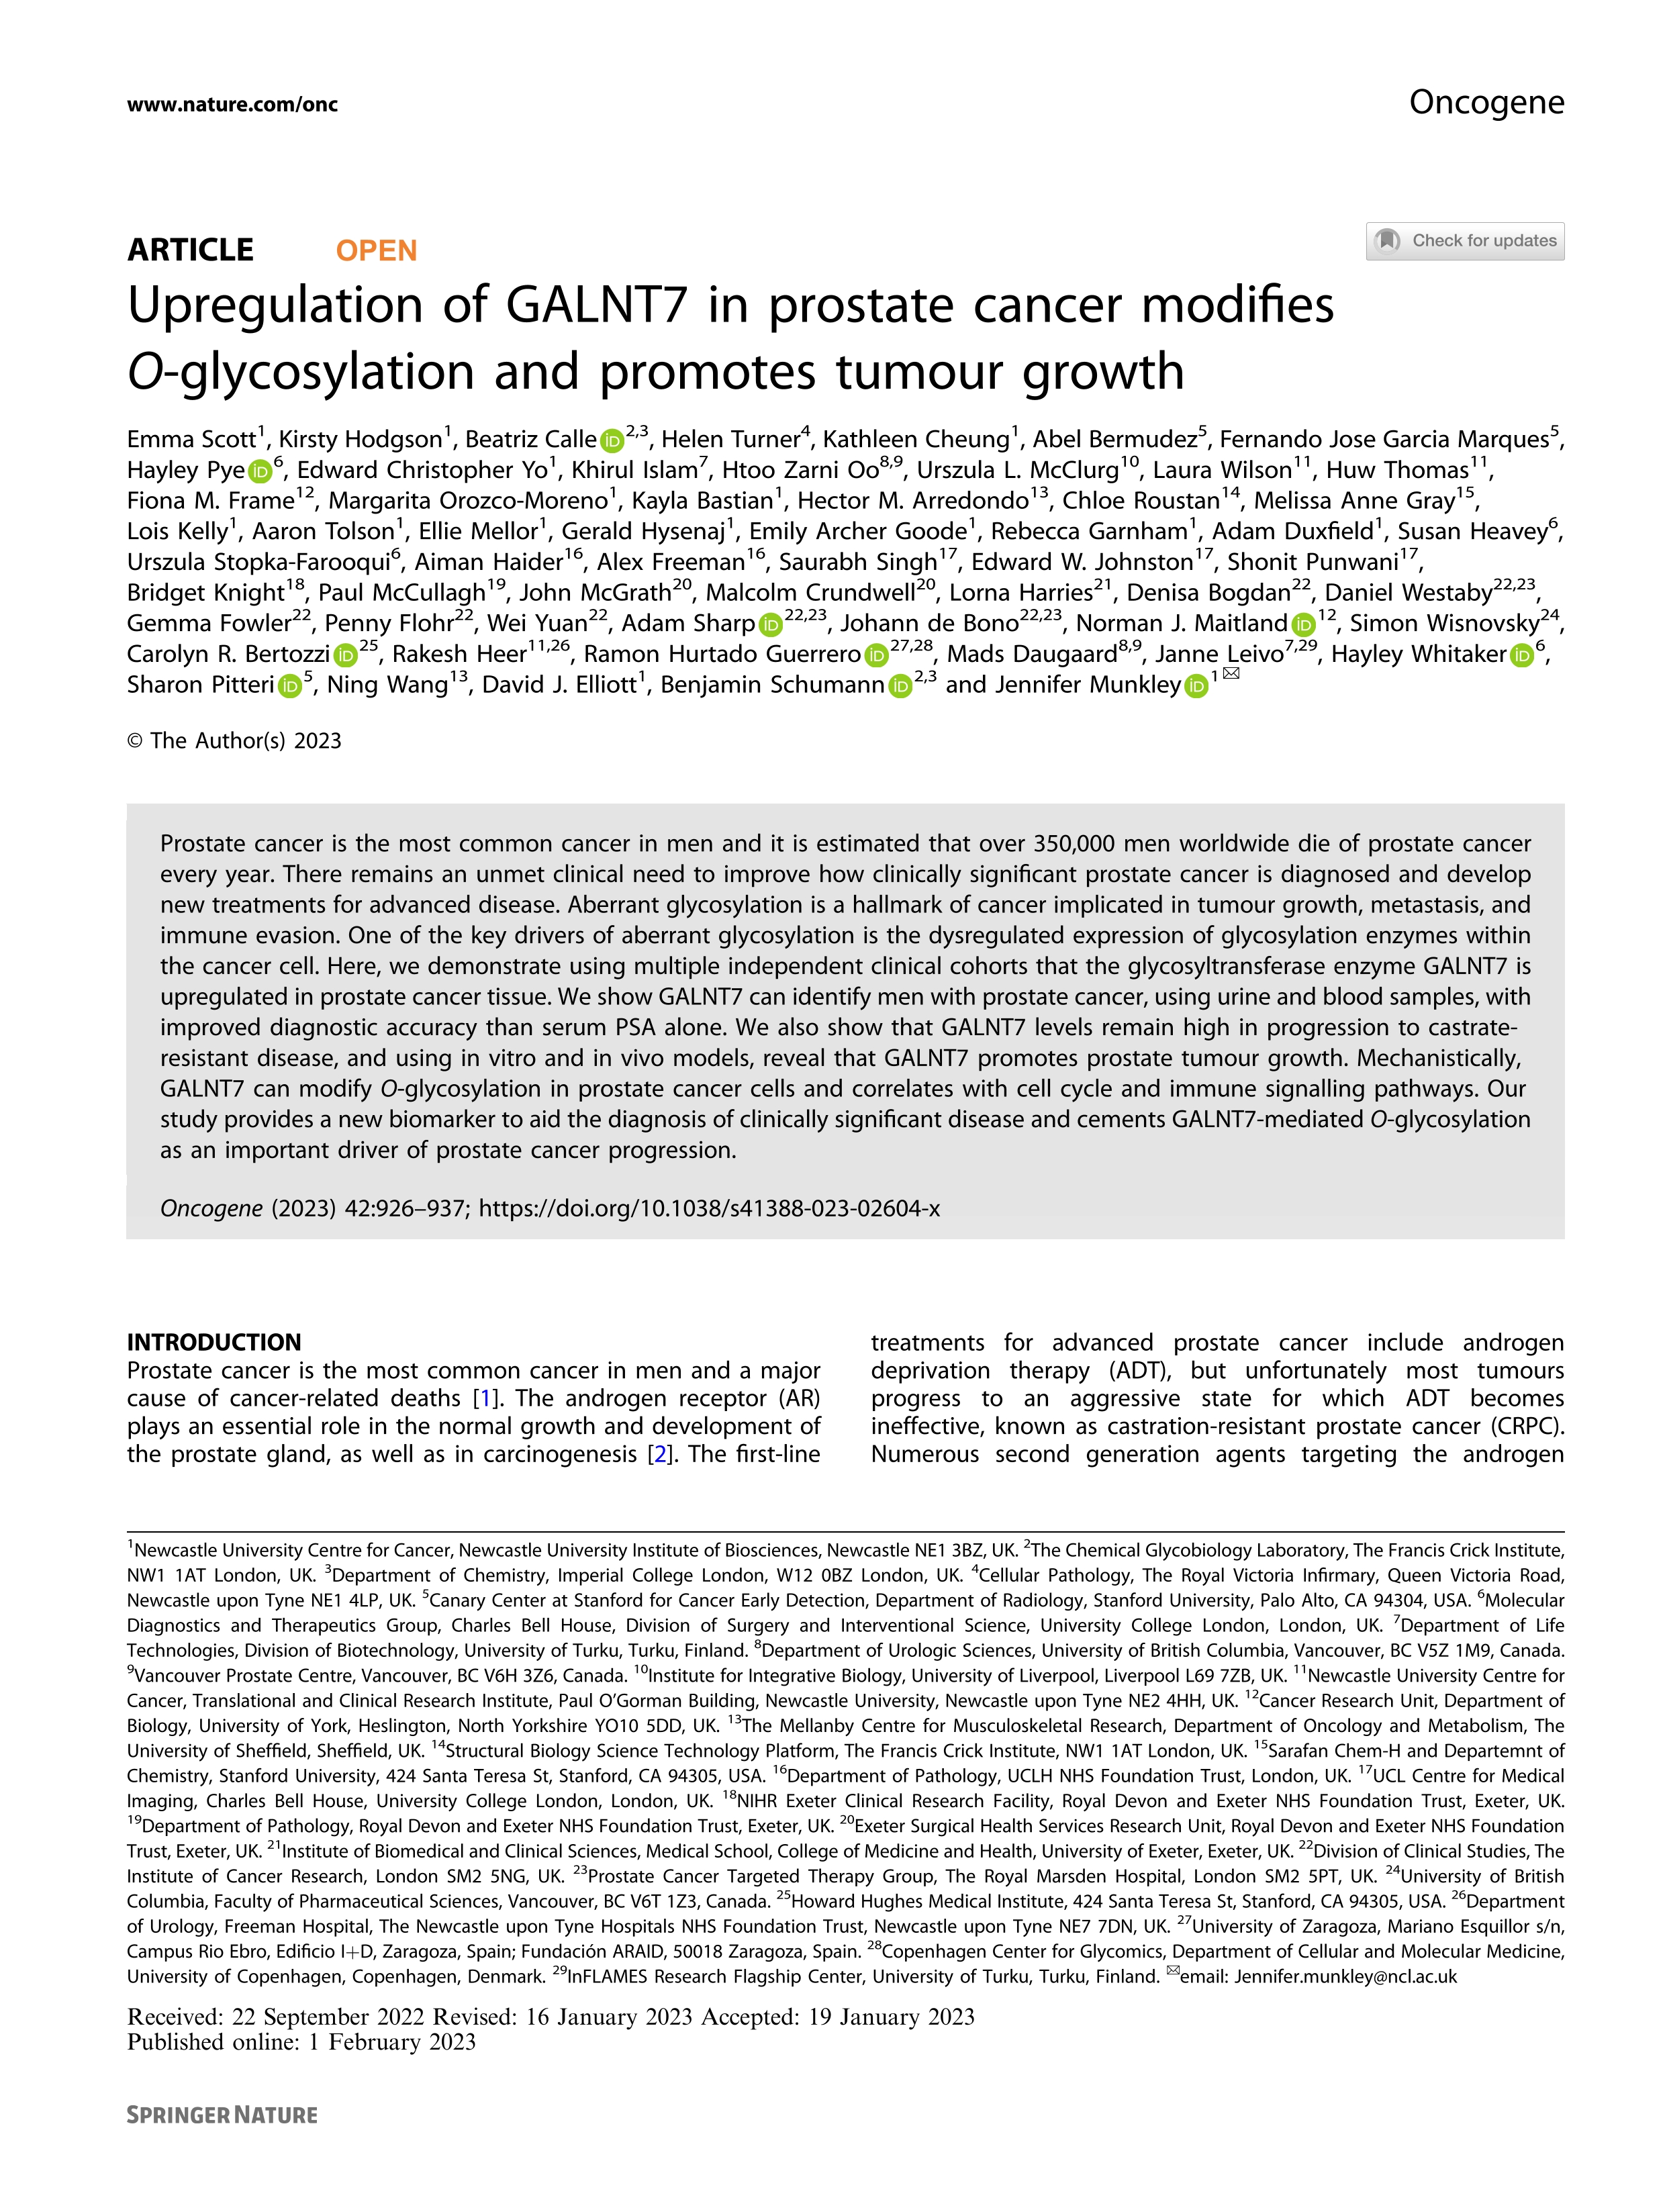 Upregulation of GALNT7 in prostate cancer modifies O-glycosylation and promotes tumour growth